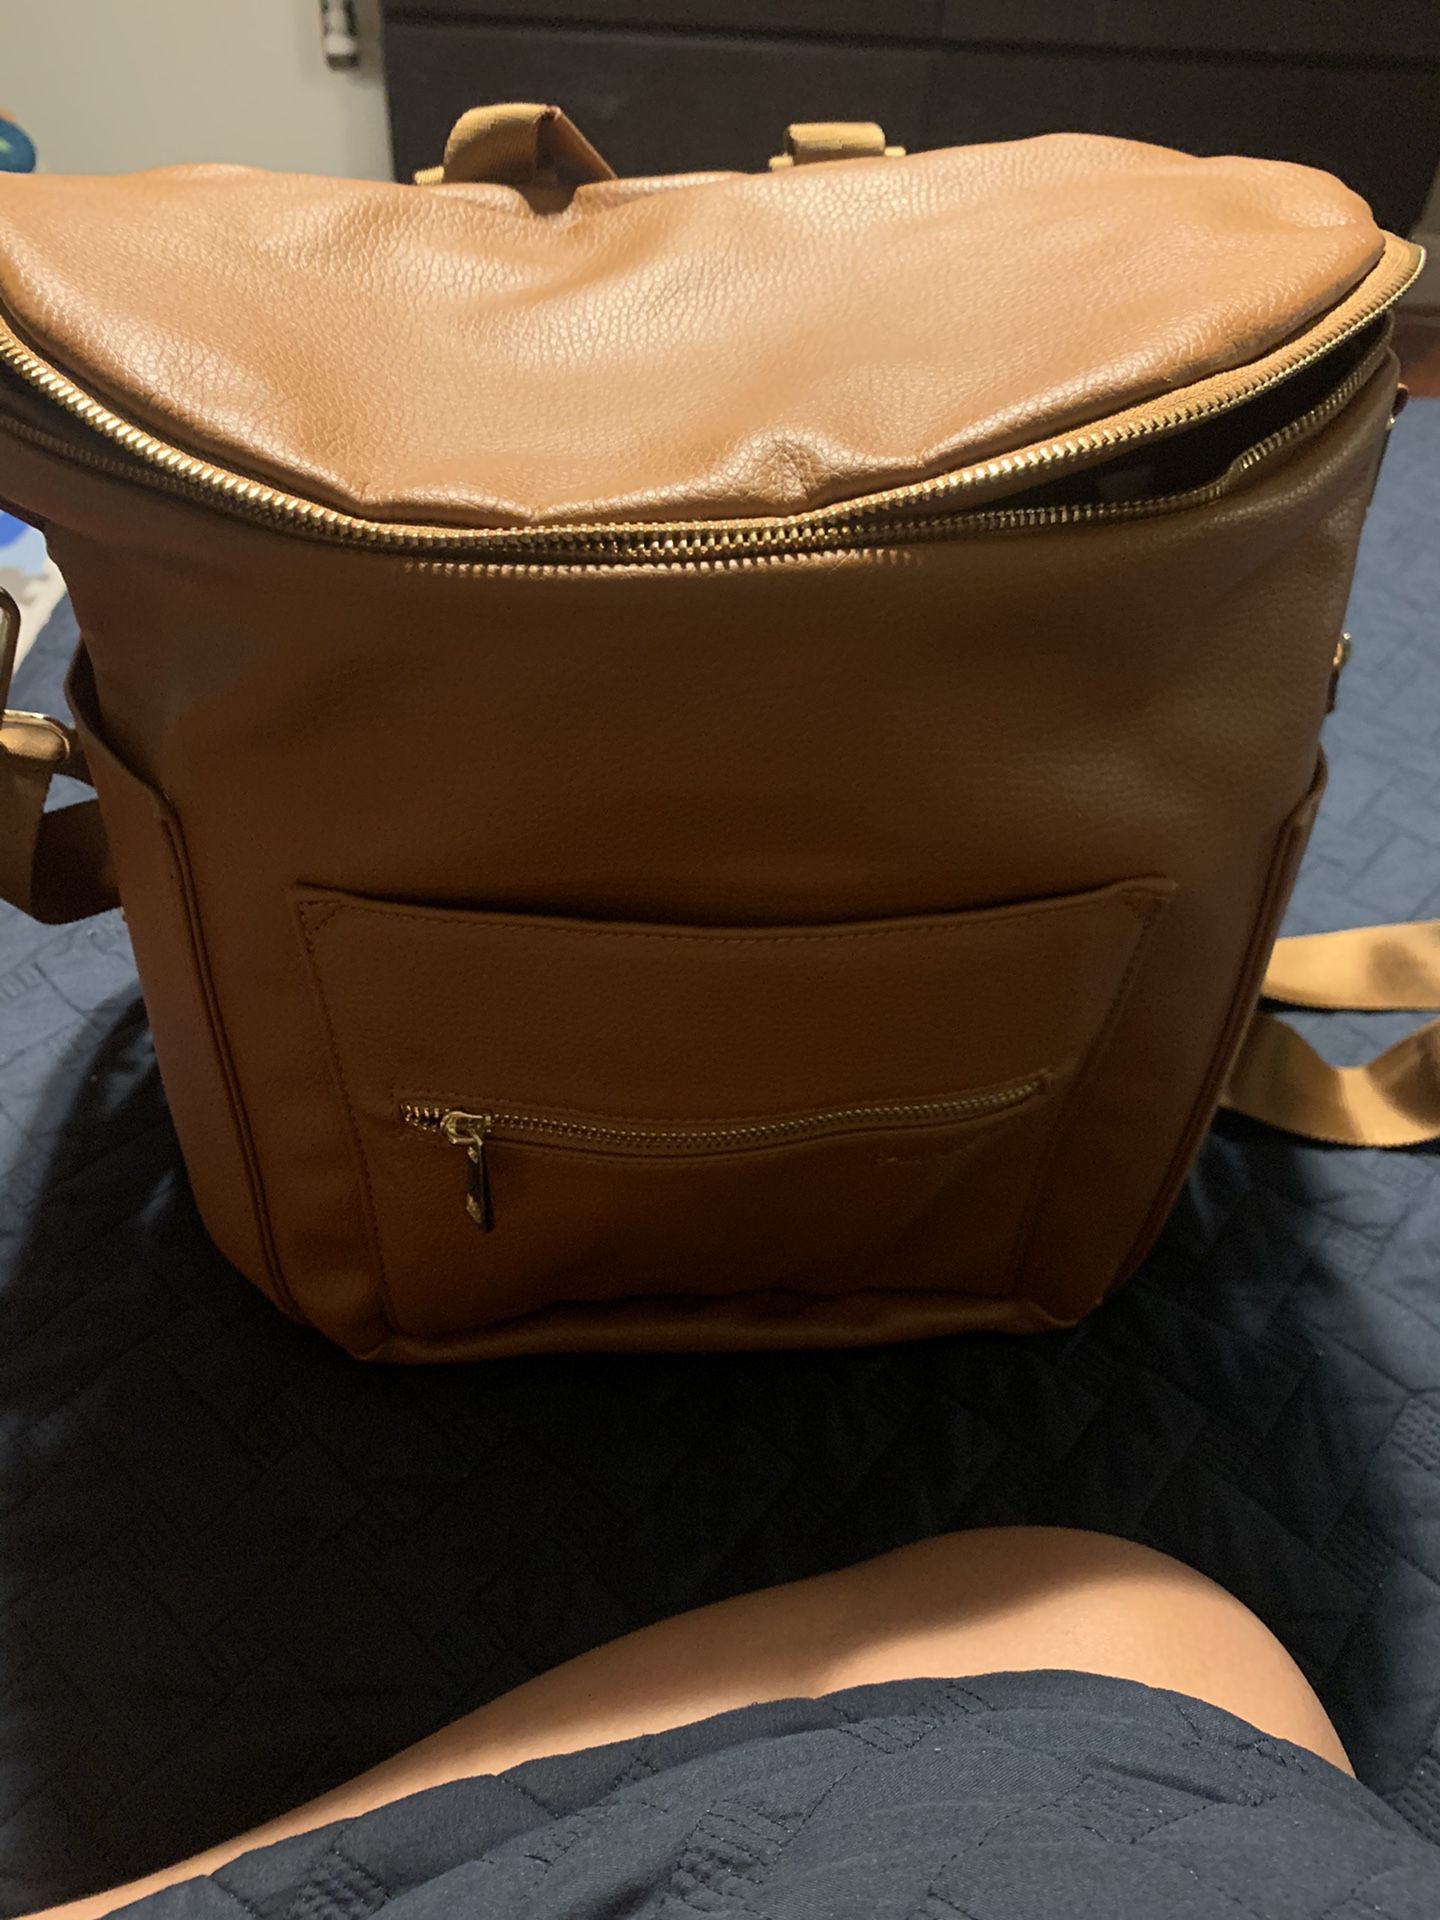 FAWN DESIGN - “fawny” pack (matches the diaper bag) for Sale in Encinitas,  CA - OfferUp